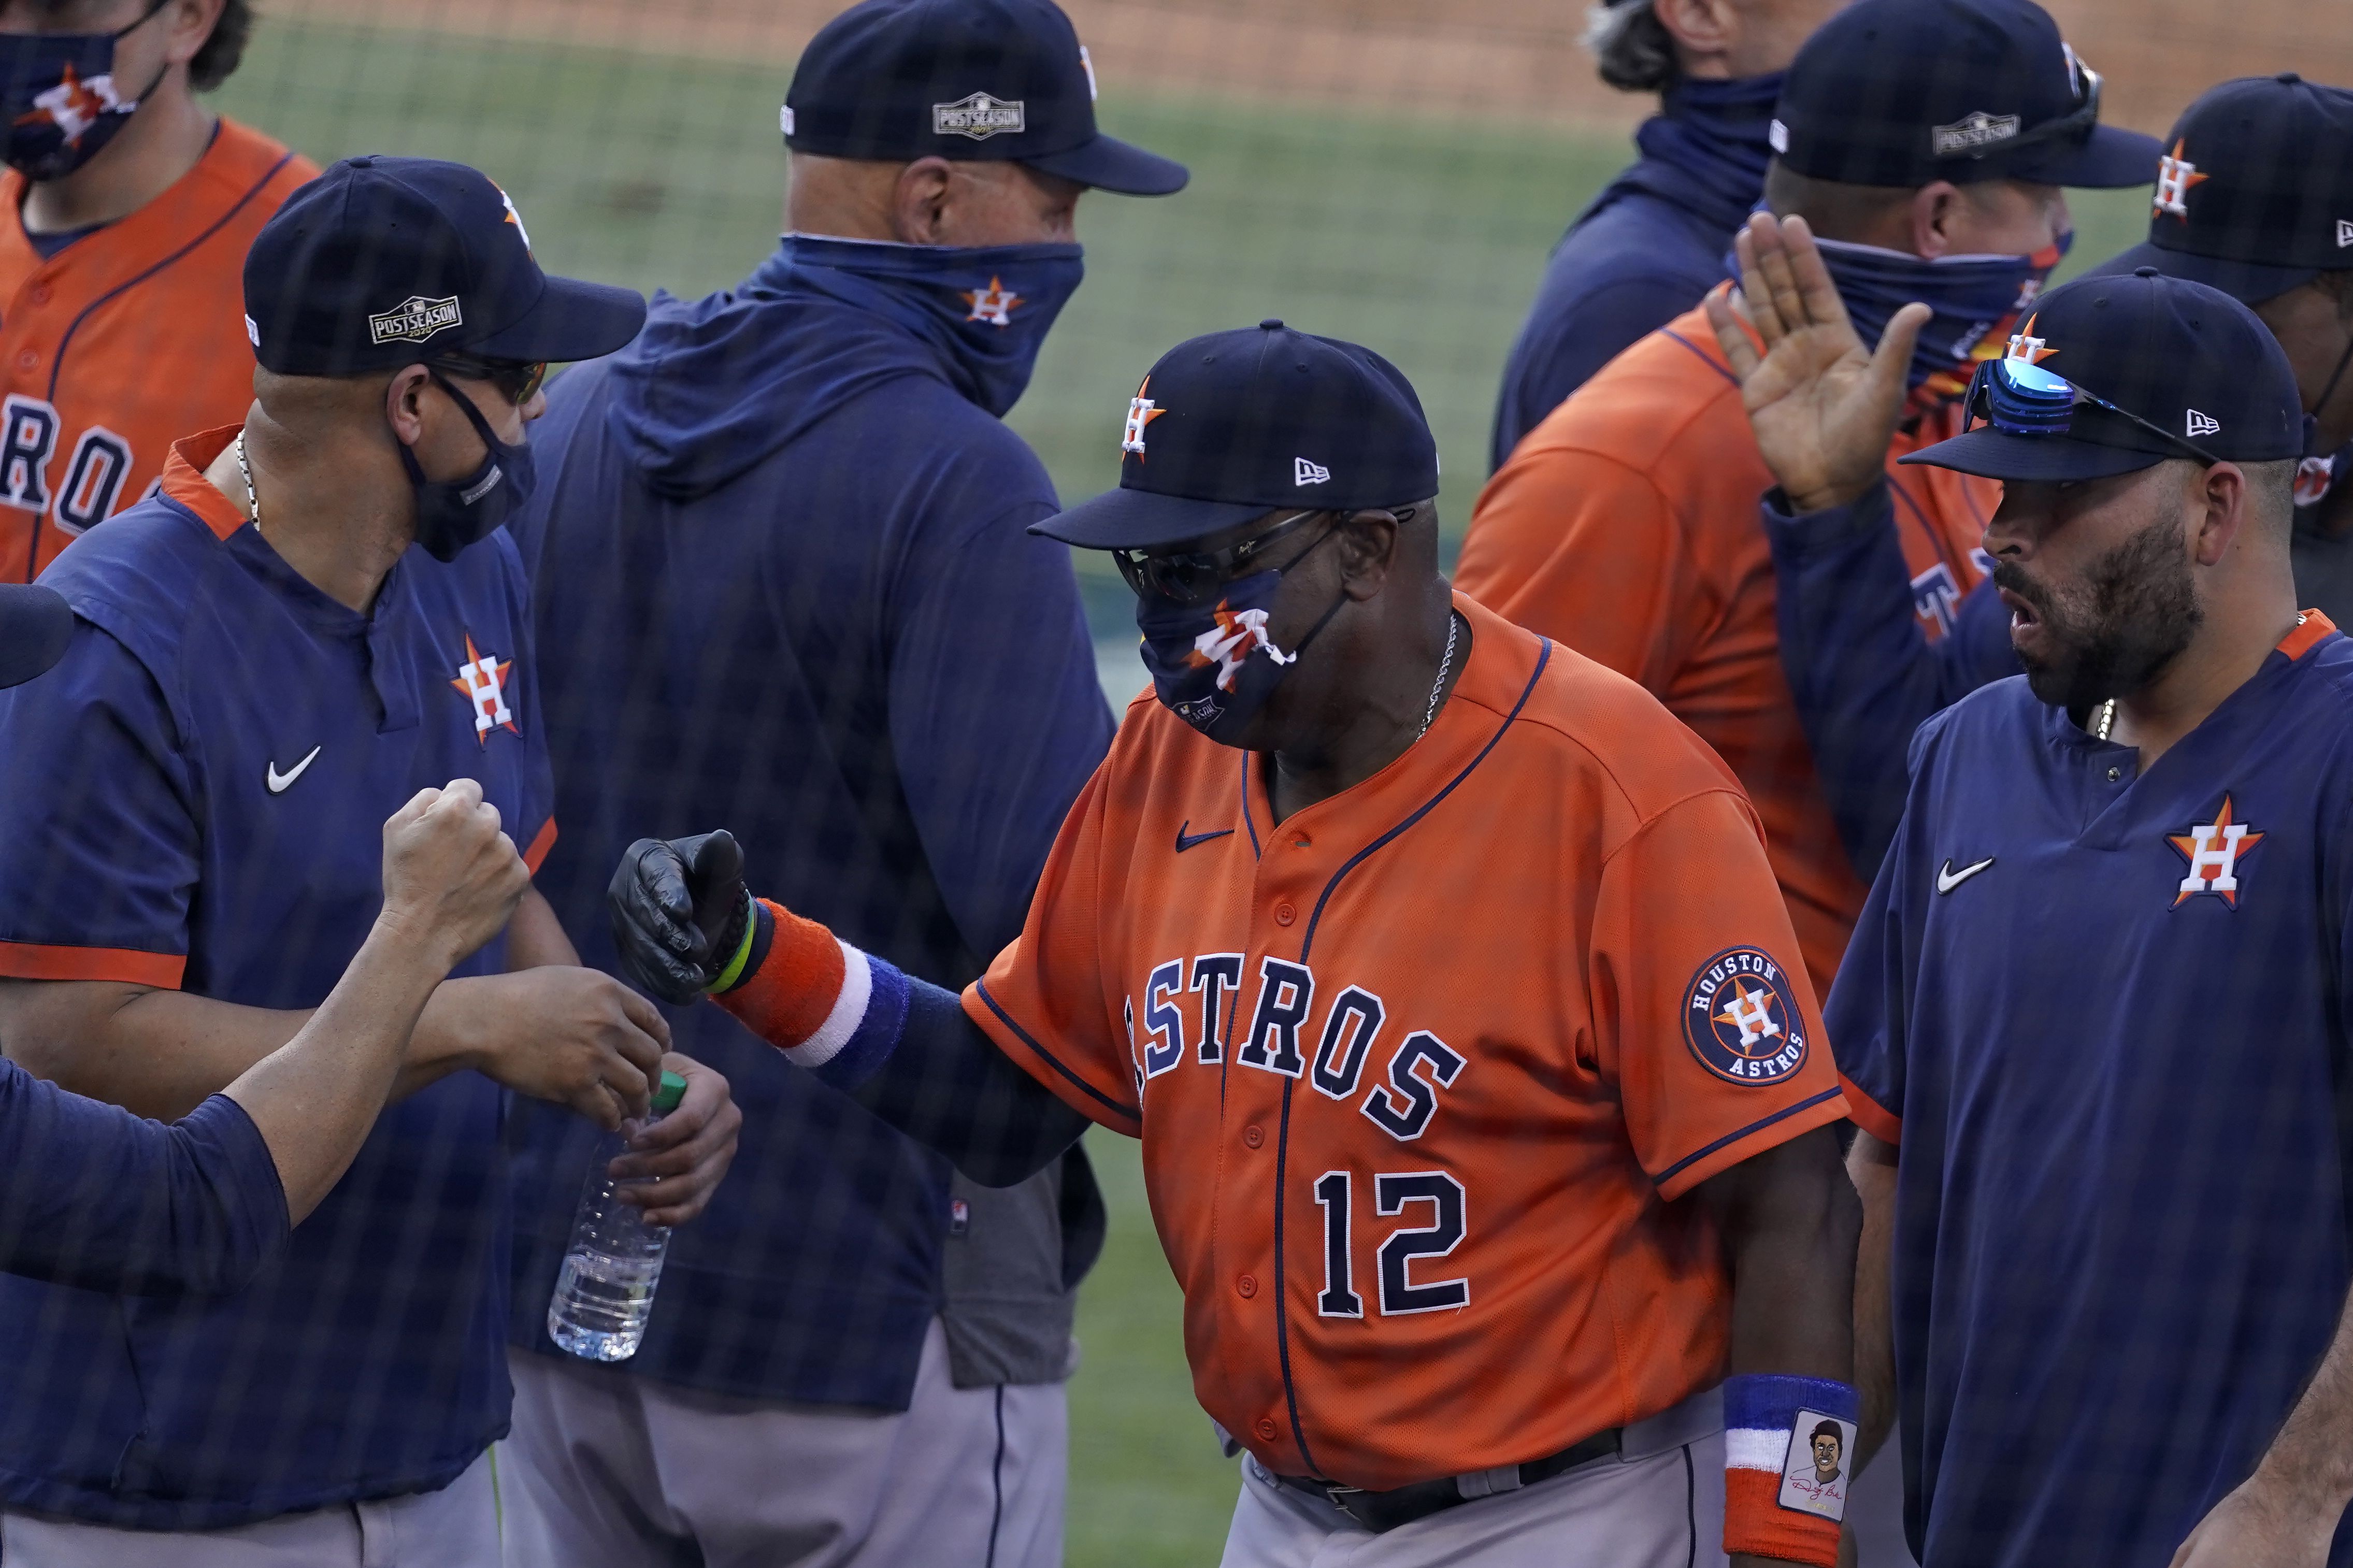 Baseball could use a feel-good story, but the Astros aren't it